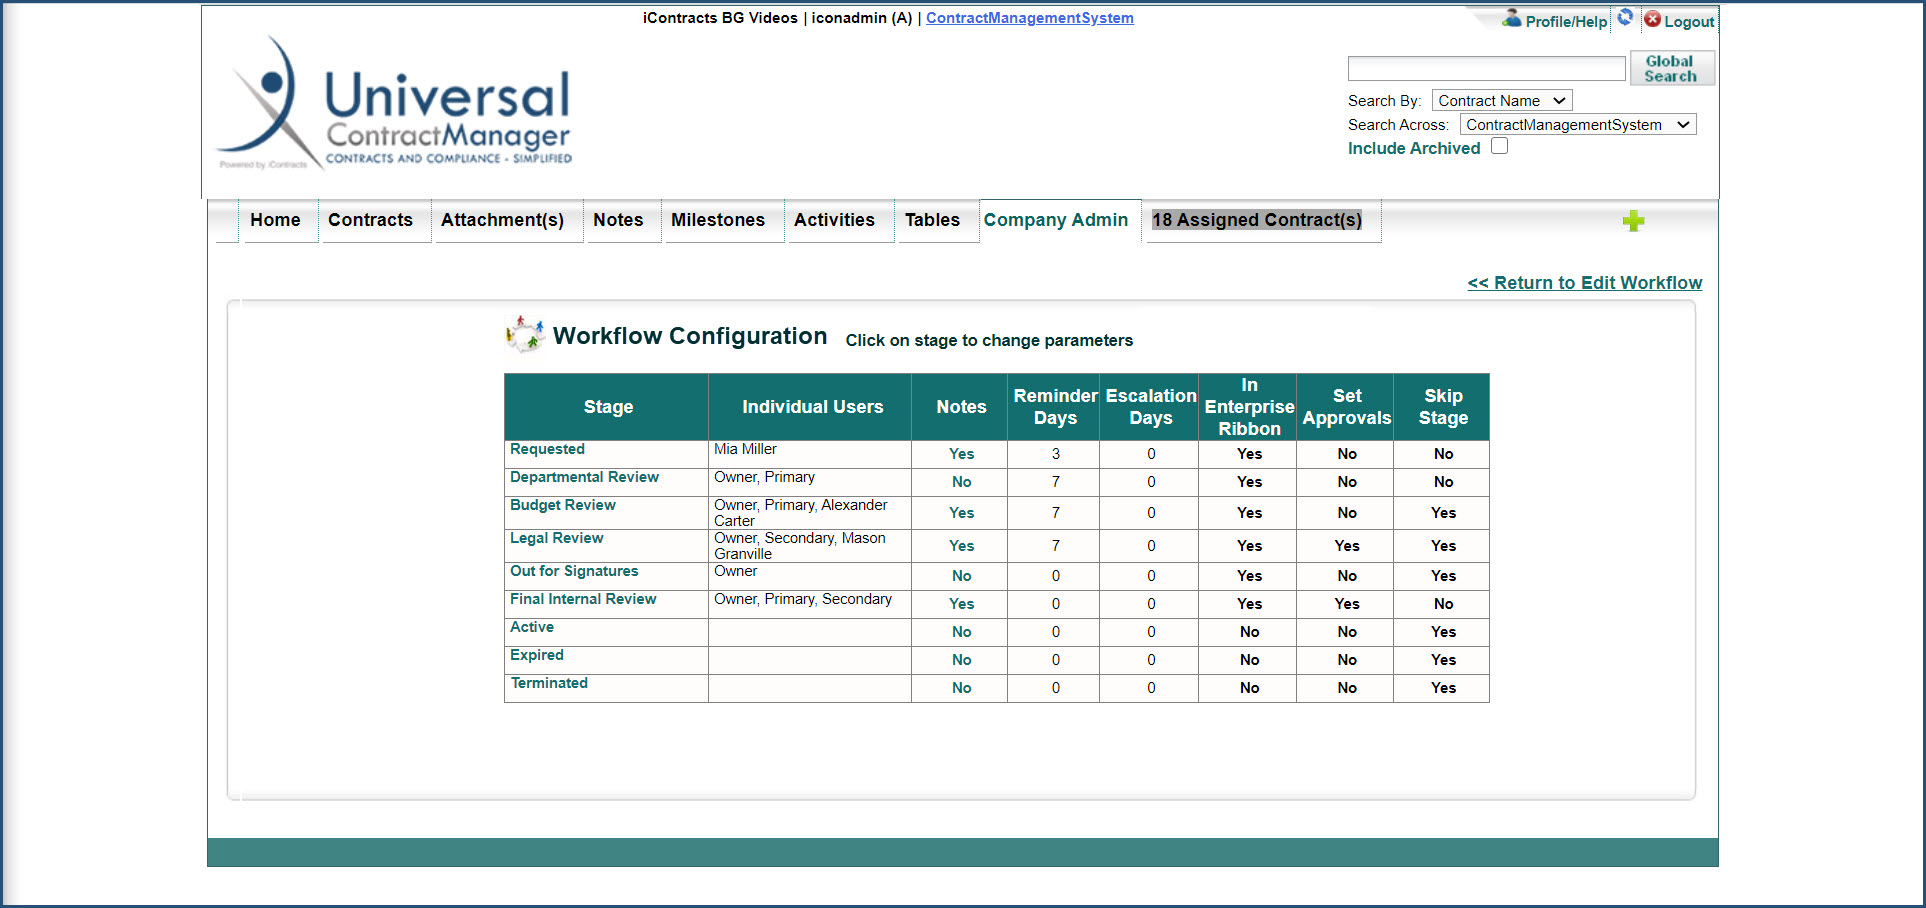 Universal Contract Manager 74448980-b4d0-4840-8be9-145bcd66b317.jpg